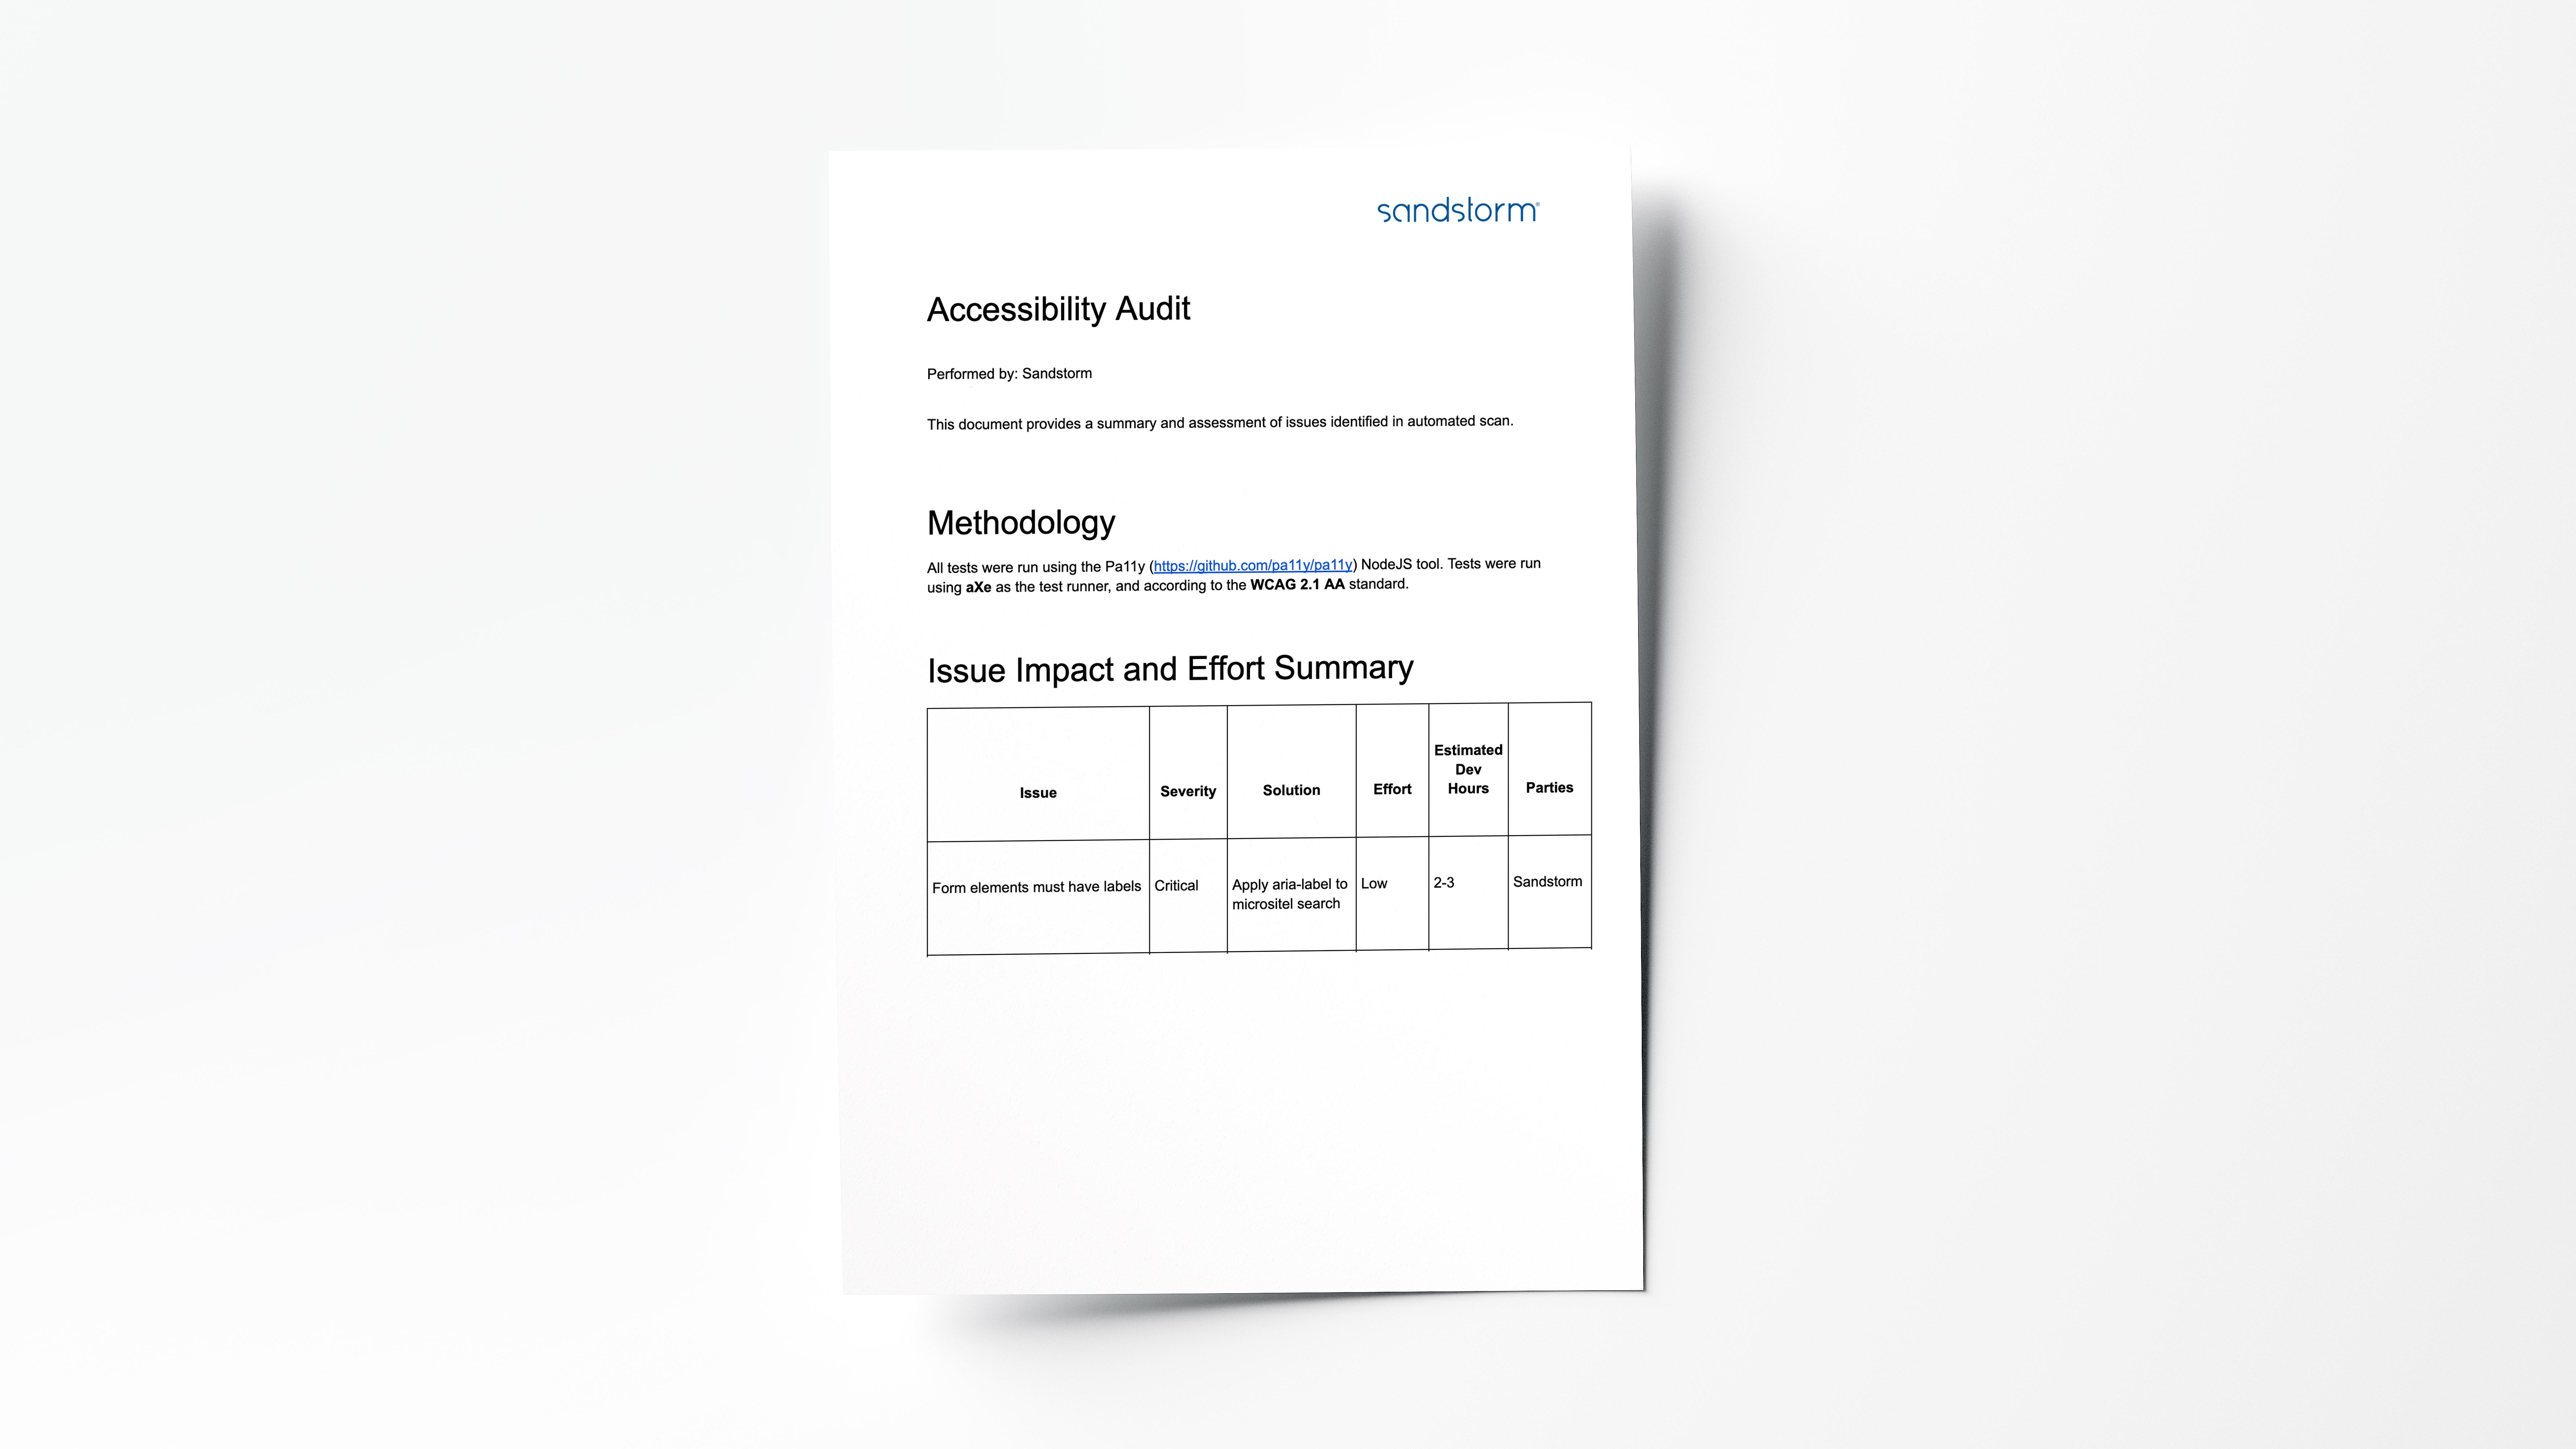 Sample accessibility audit document outlining issues, severity, solution, effort, hours, and parties involved.